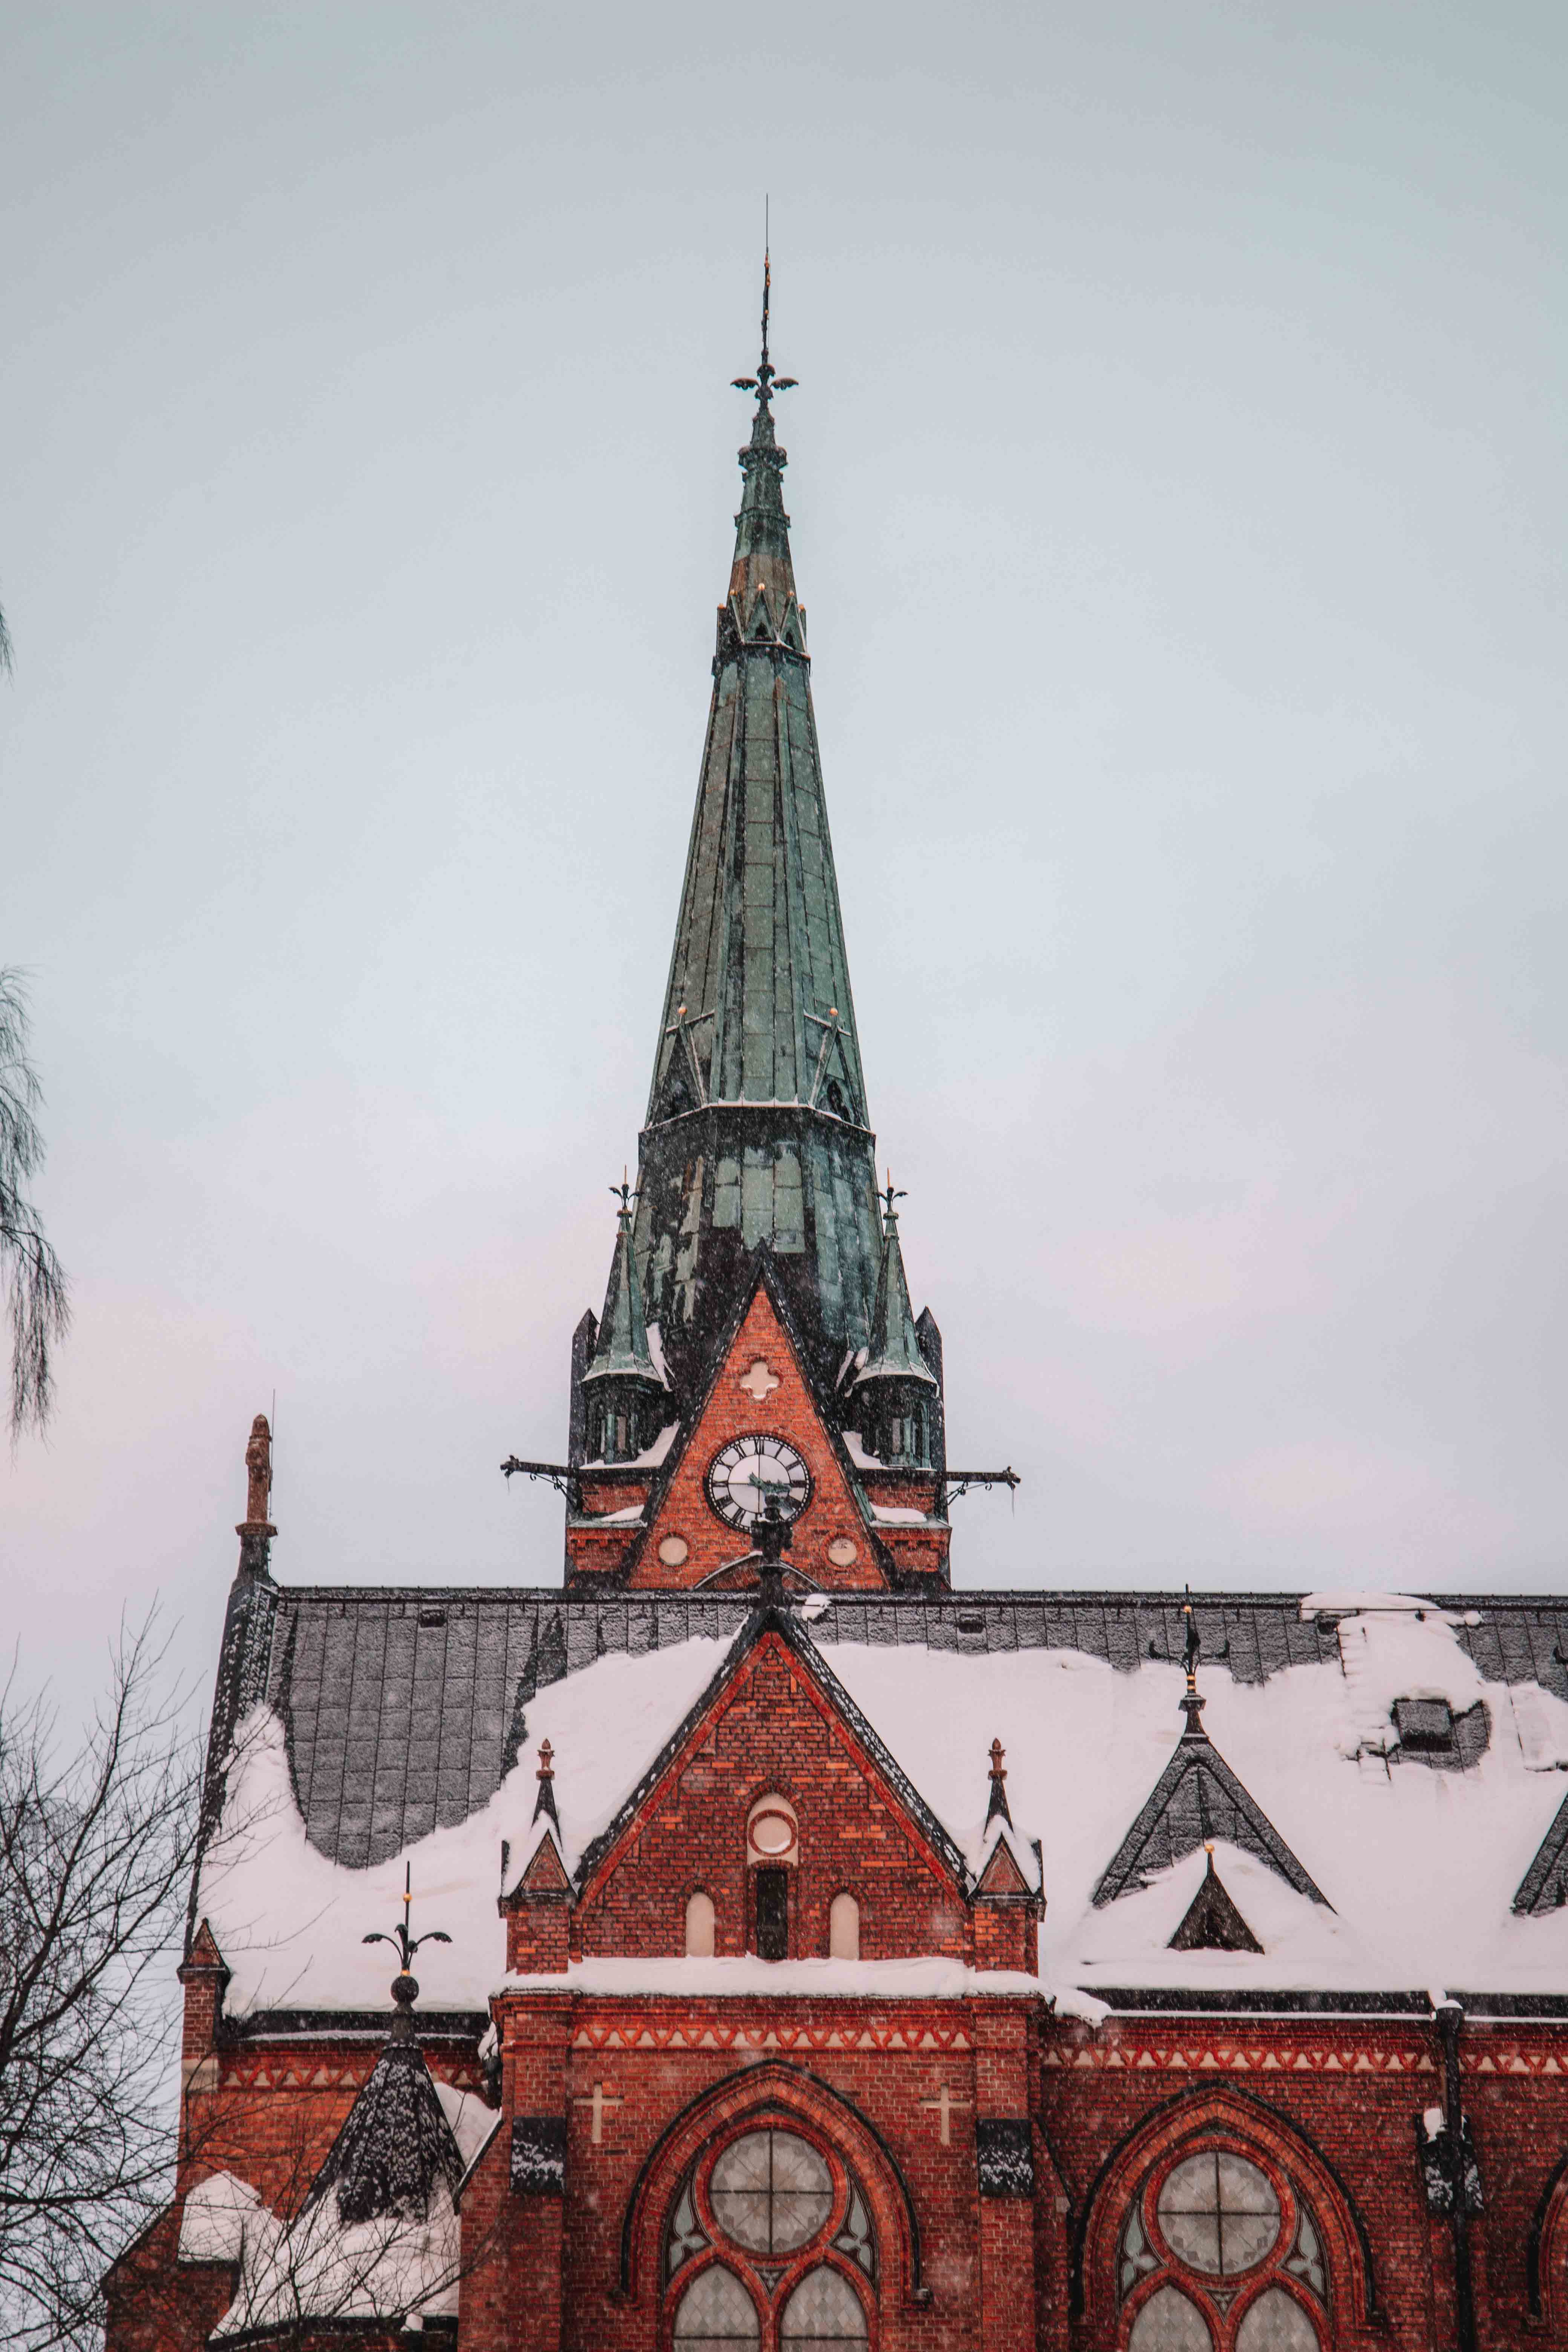 Umeå in the winter city photographs